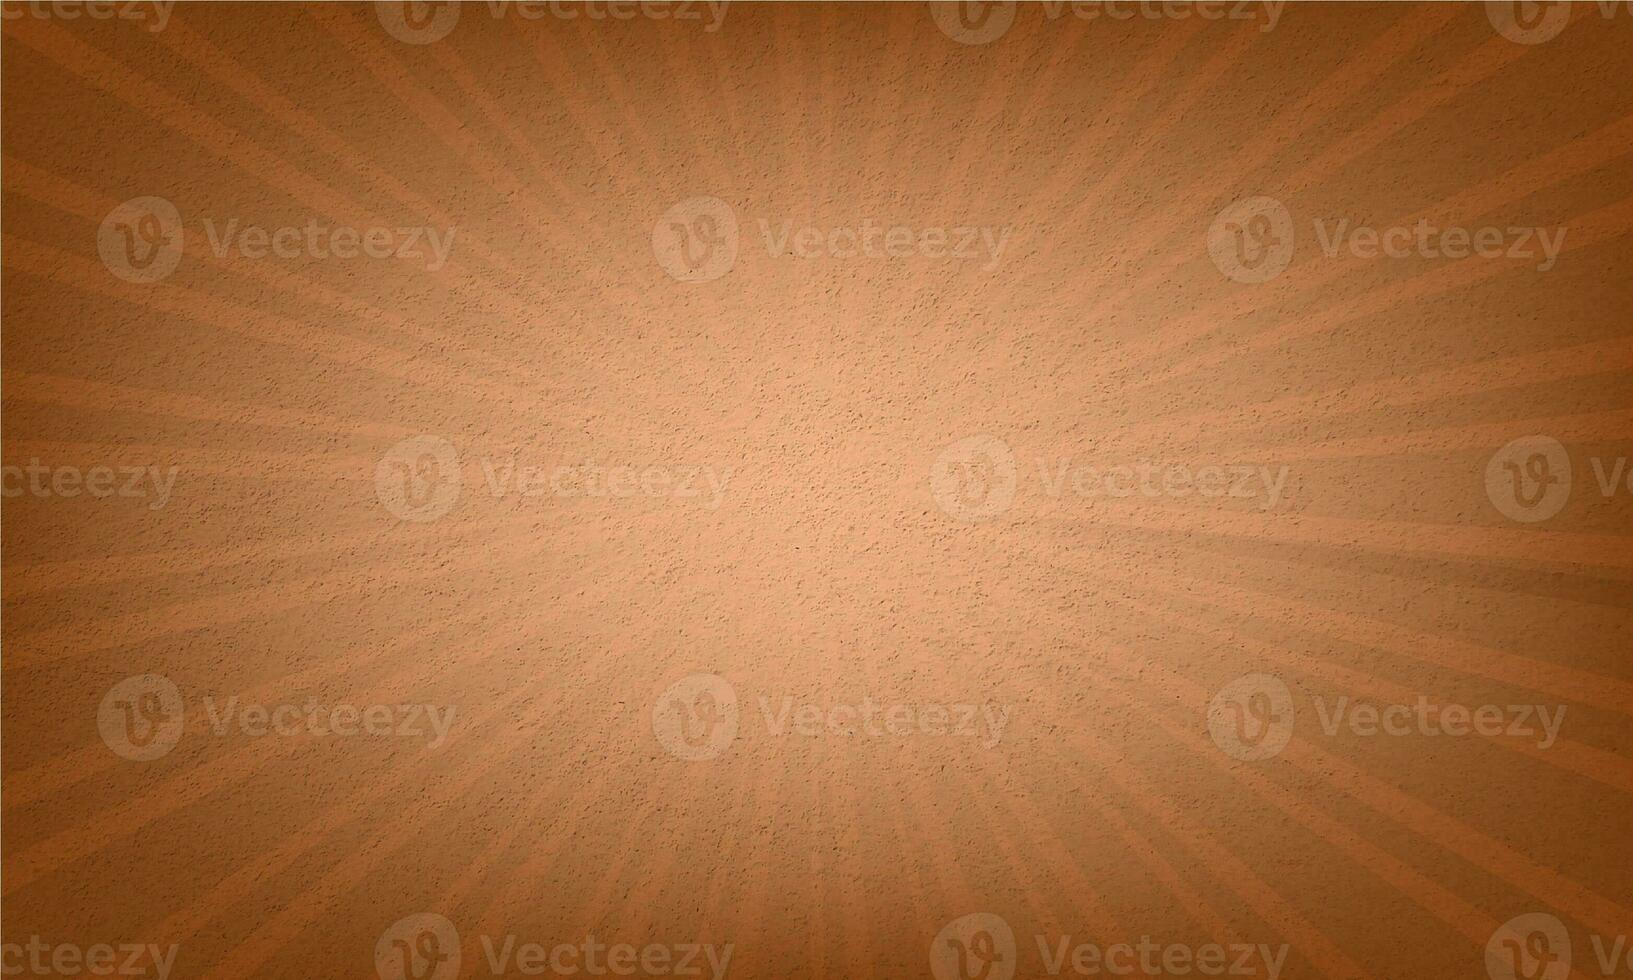 Saddle brown color abstract sunburst retro rays background photo